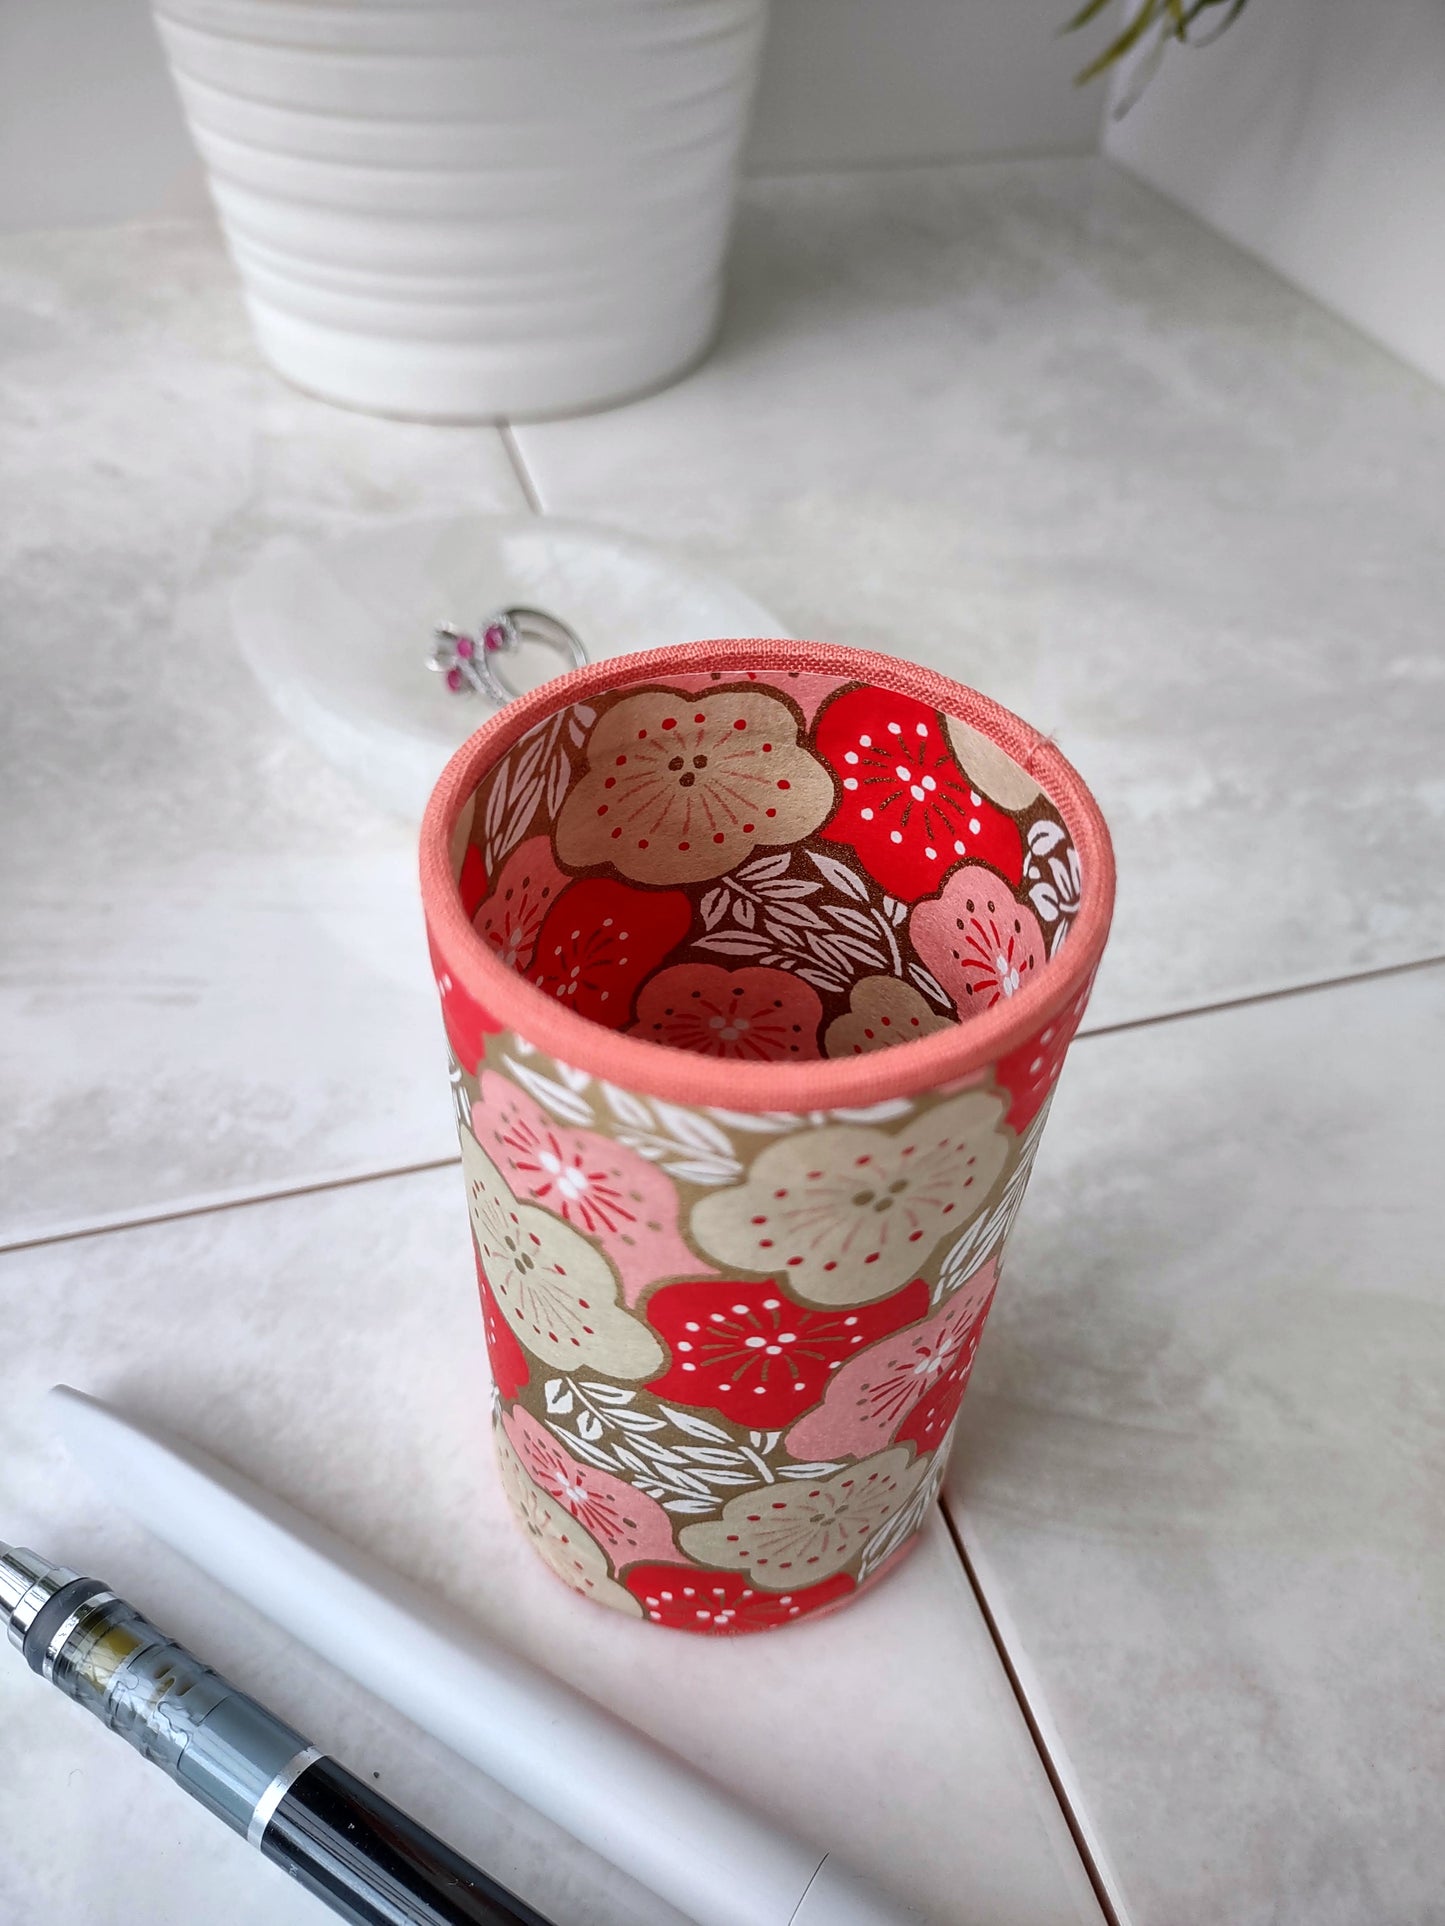 Red and Pink Floral Pencil Cup